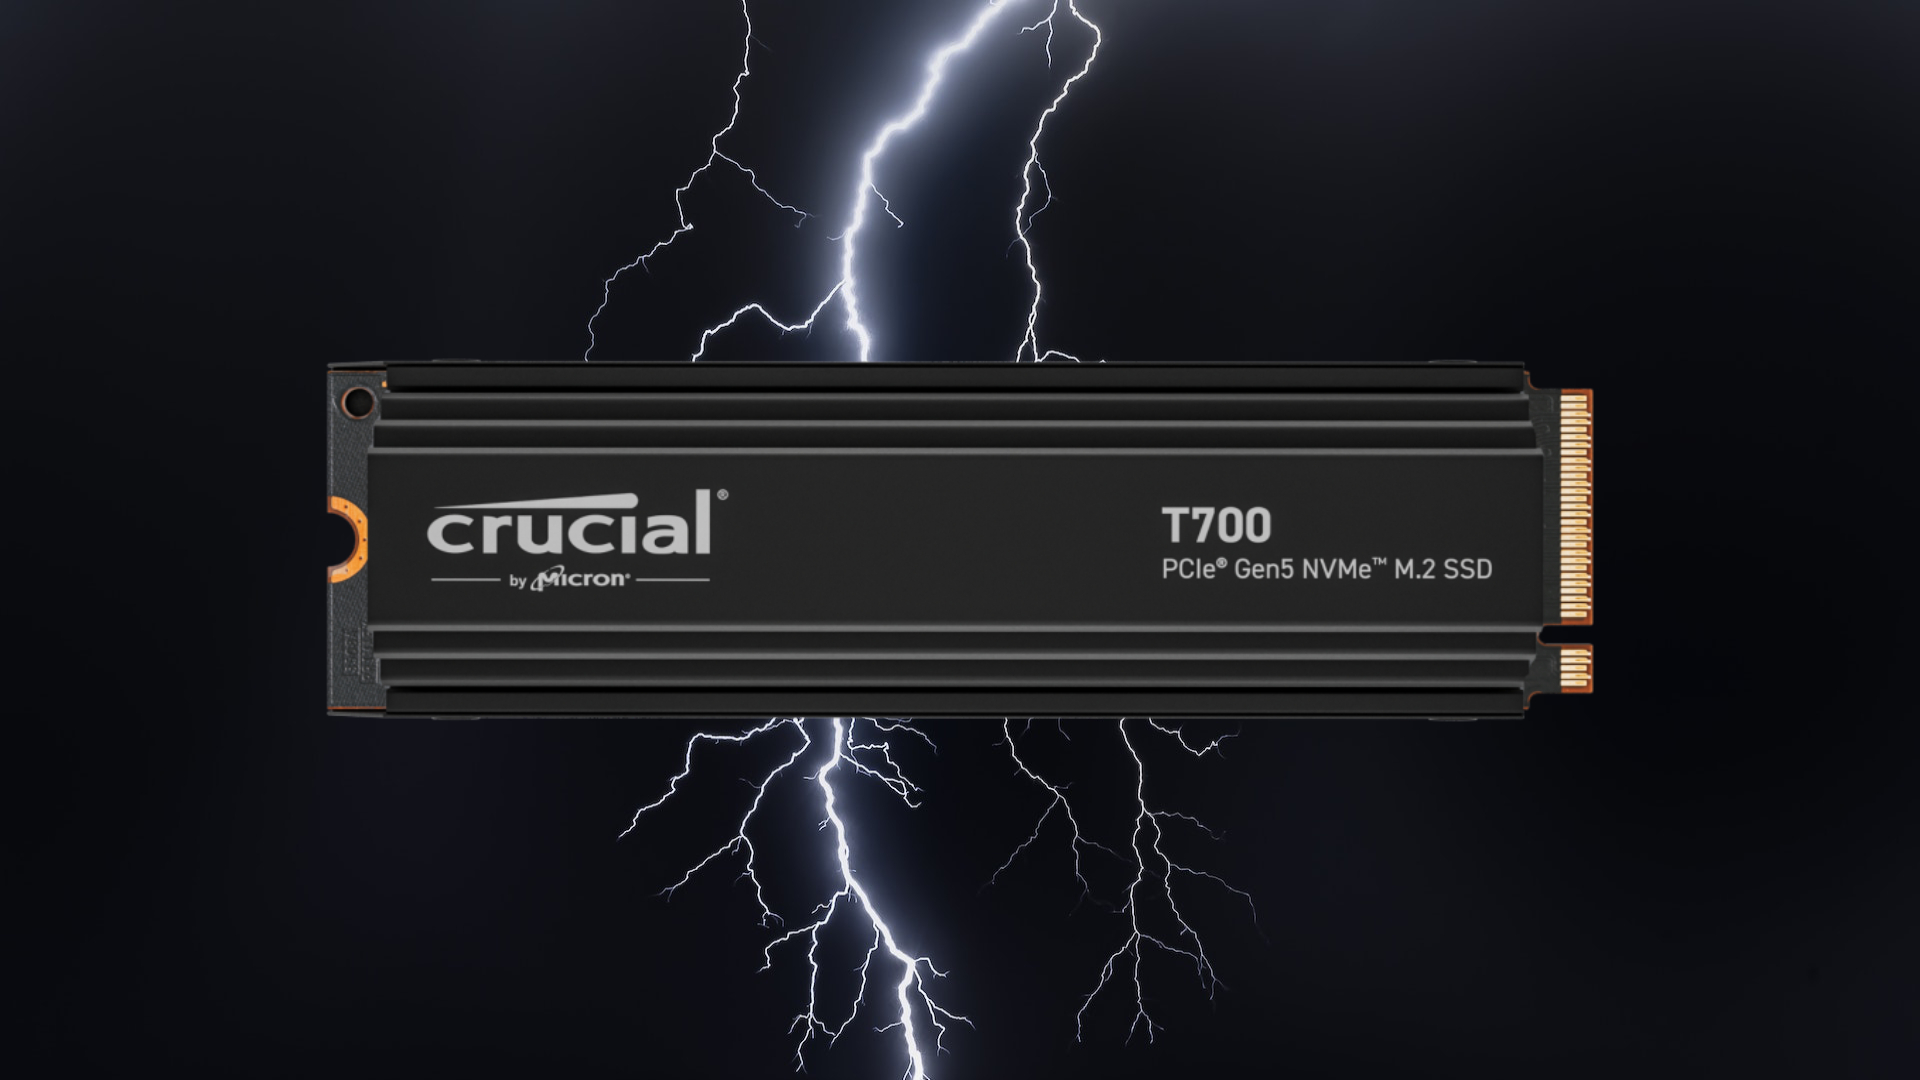 Nvidia's new driver unlocks the lightning fast speeds of PCIe 5.0 SSDs